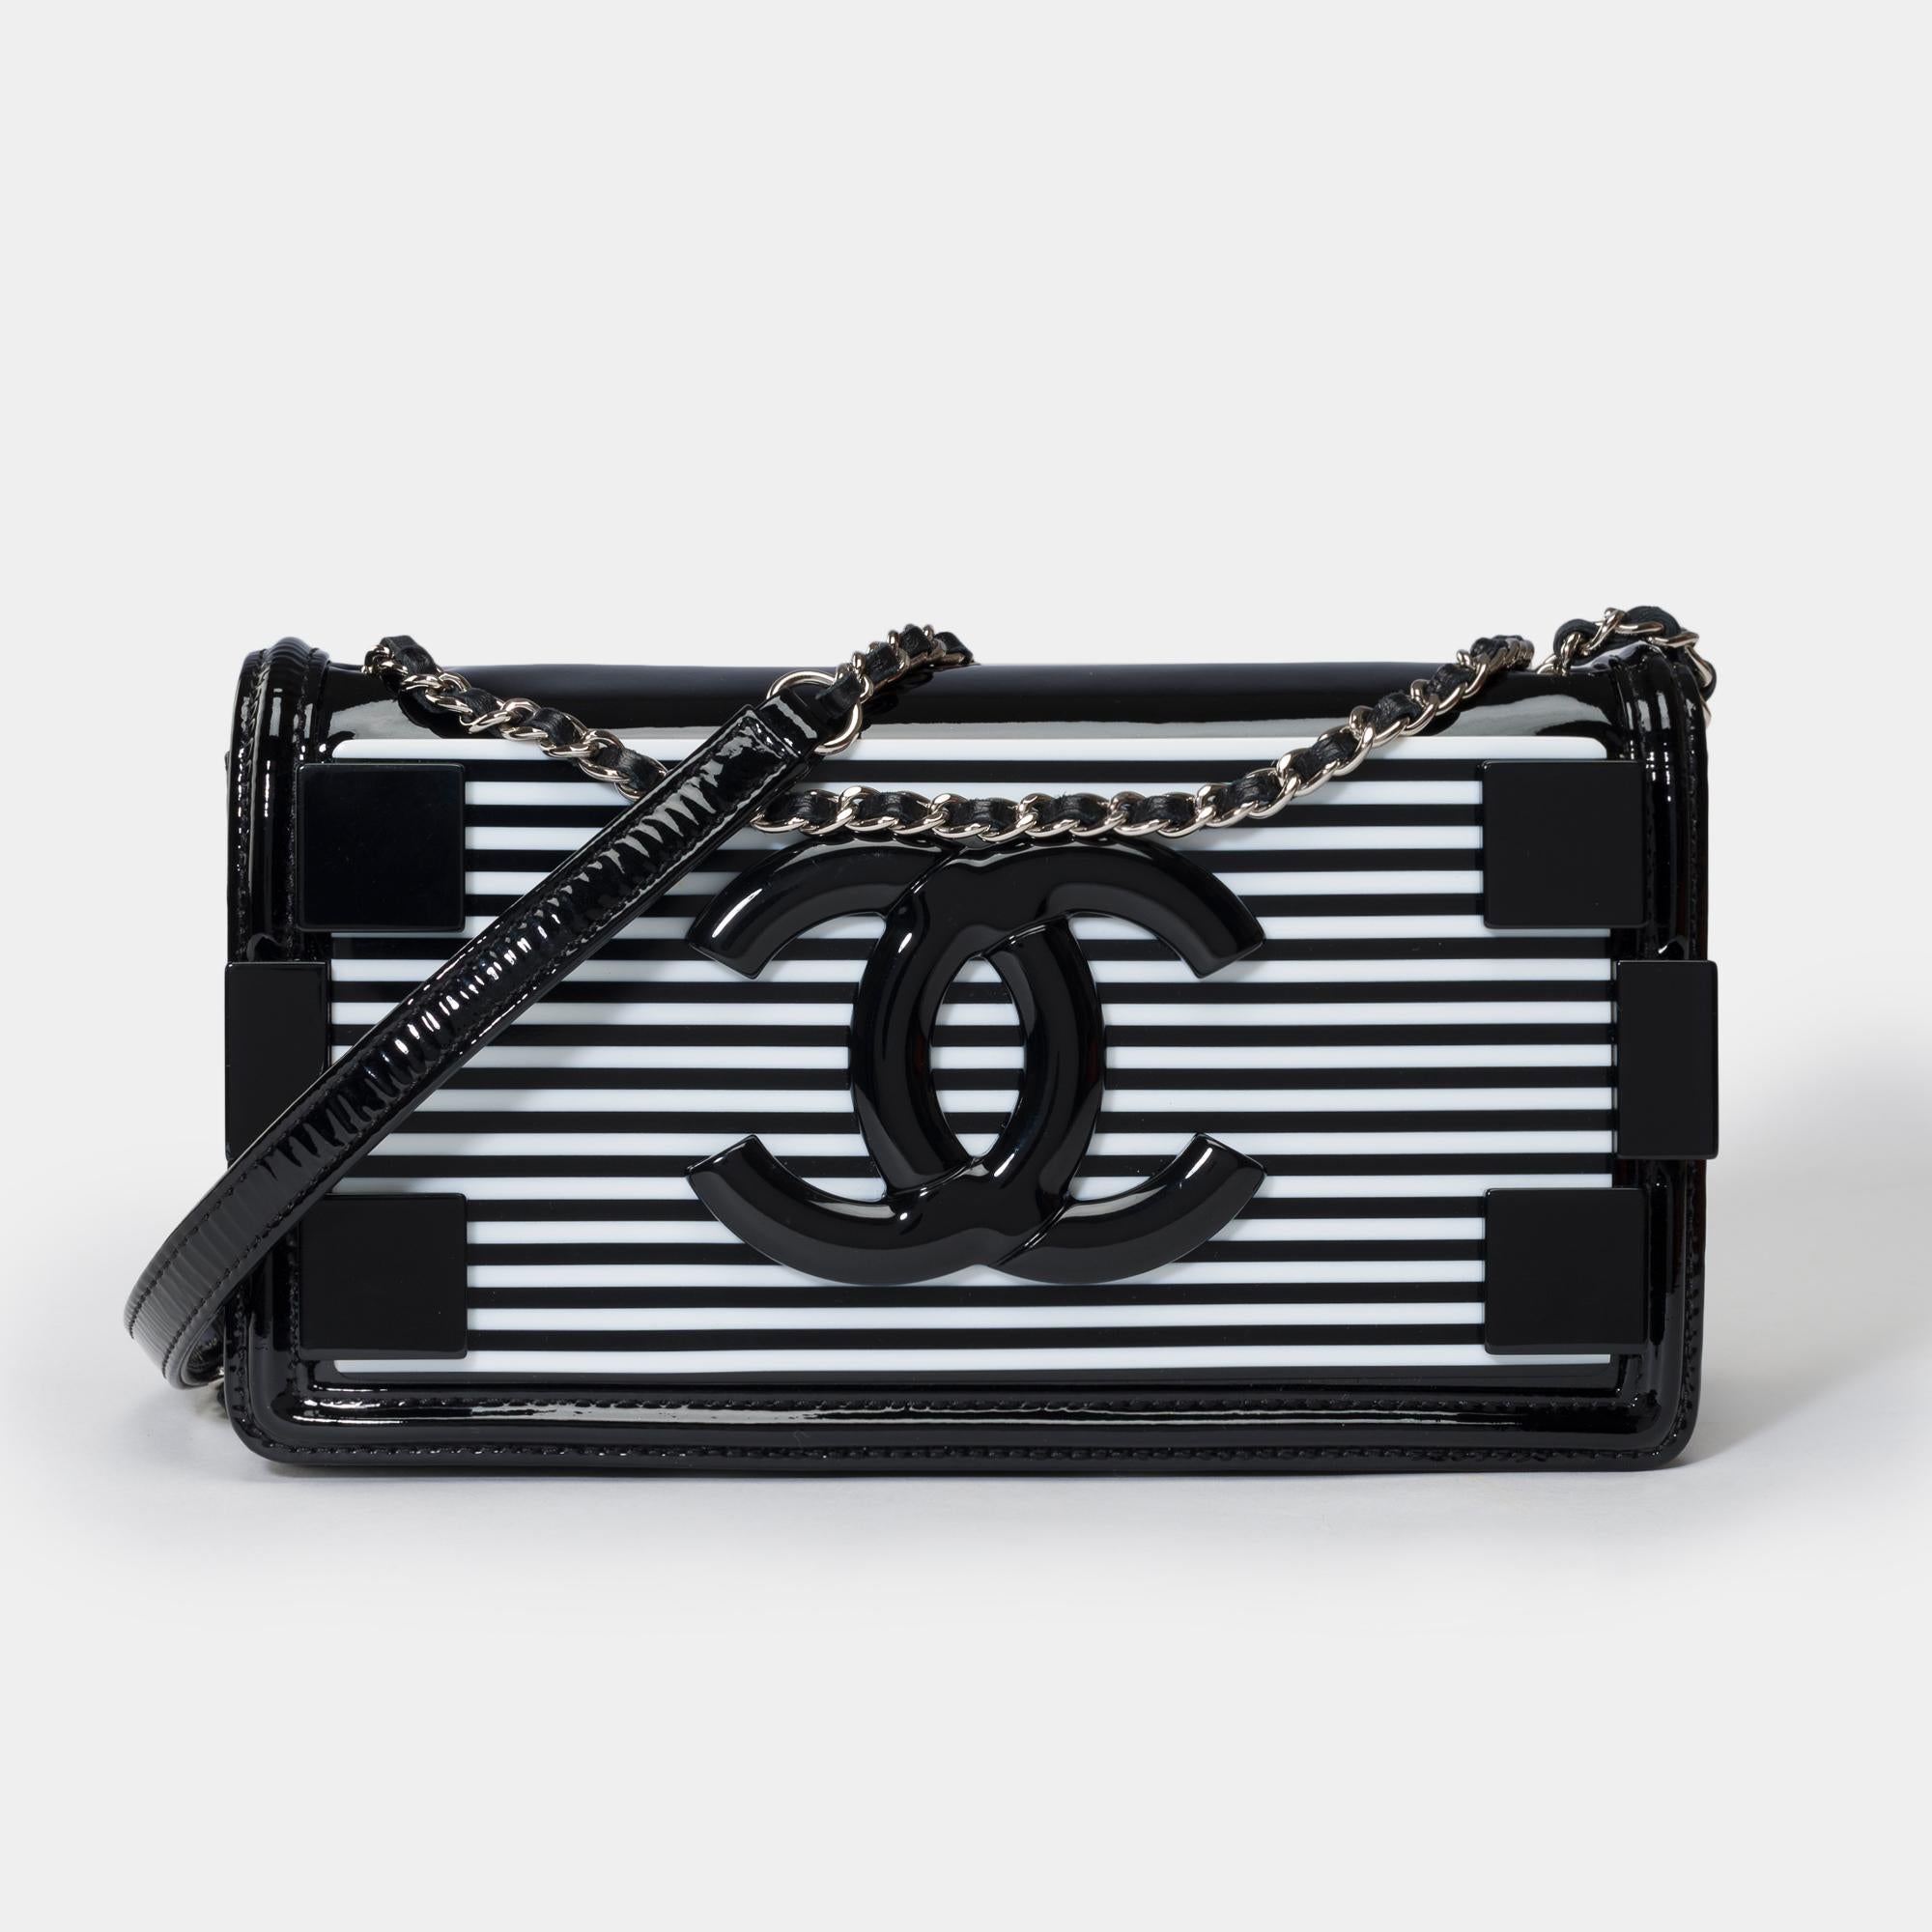 Exceptional​​ ​​&​​ ​​Rare​​ ​​Chanel​ ​brick​​ ​​lego​​ ​shoulder​ ​flap​ ​bag​ ​in​ ​​quilted​​ ​​patent​​ ​​black​ ​leather​​ ​​with​​ ​​plexiglas​​ ​​plates​​ ​​on​​ ​​the​​ ​​front,​​ ​​Silver-tone​​ ​​metal​​ ​​shoulder​​ ​​strap​​